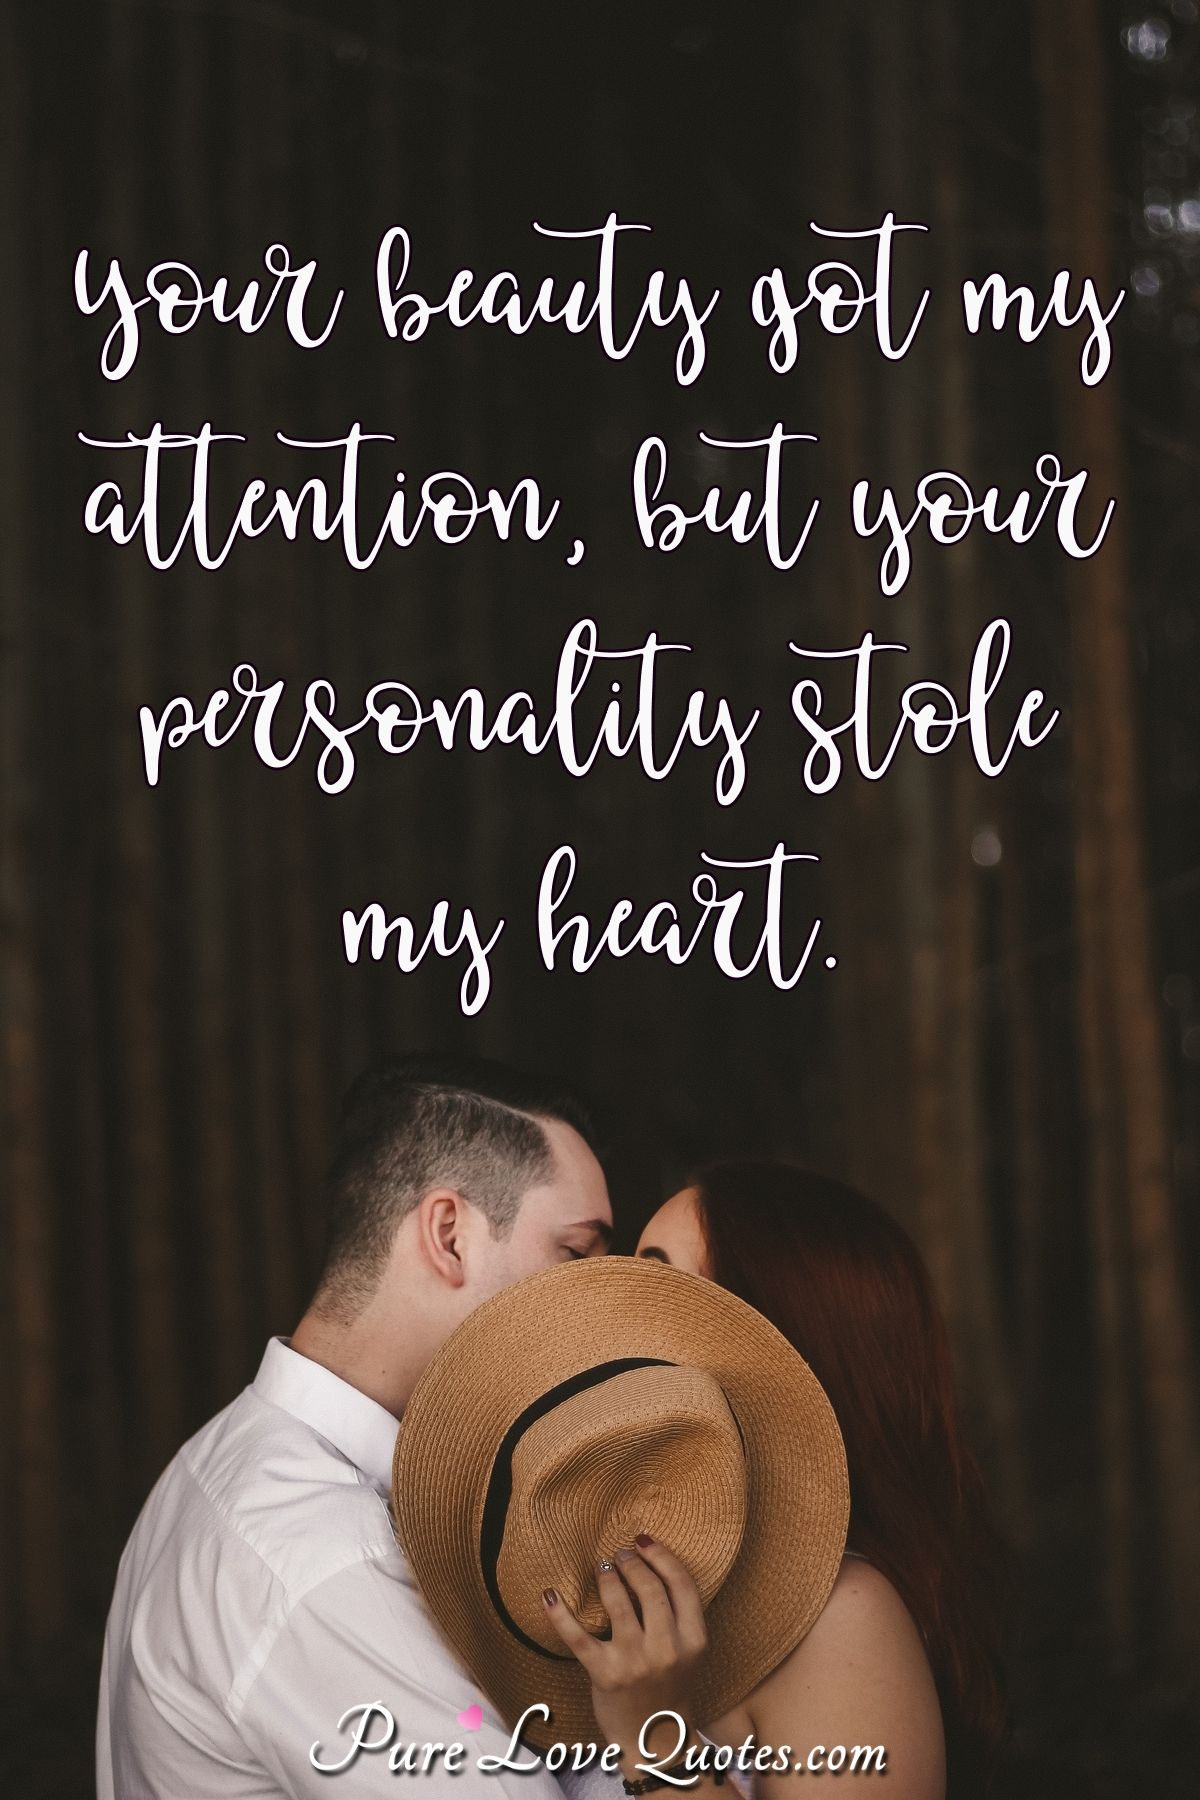 Your beauty got my attention, but your personality stole my heart. - Anonymous